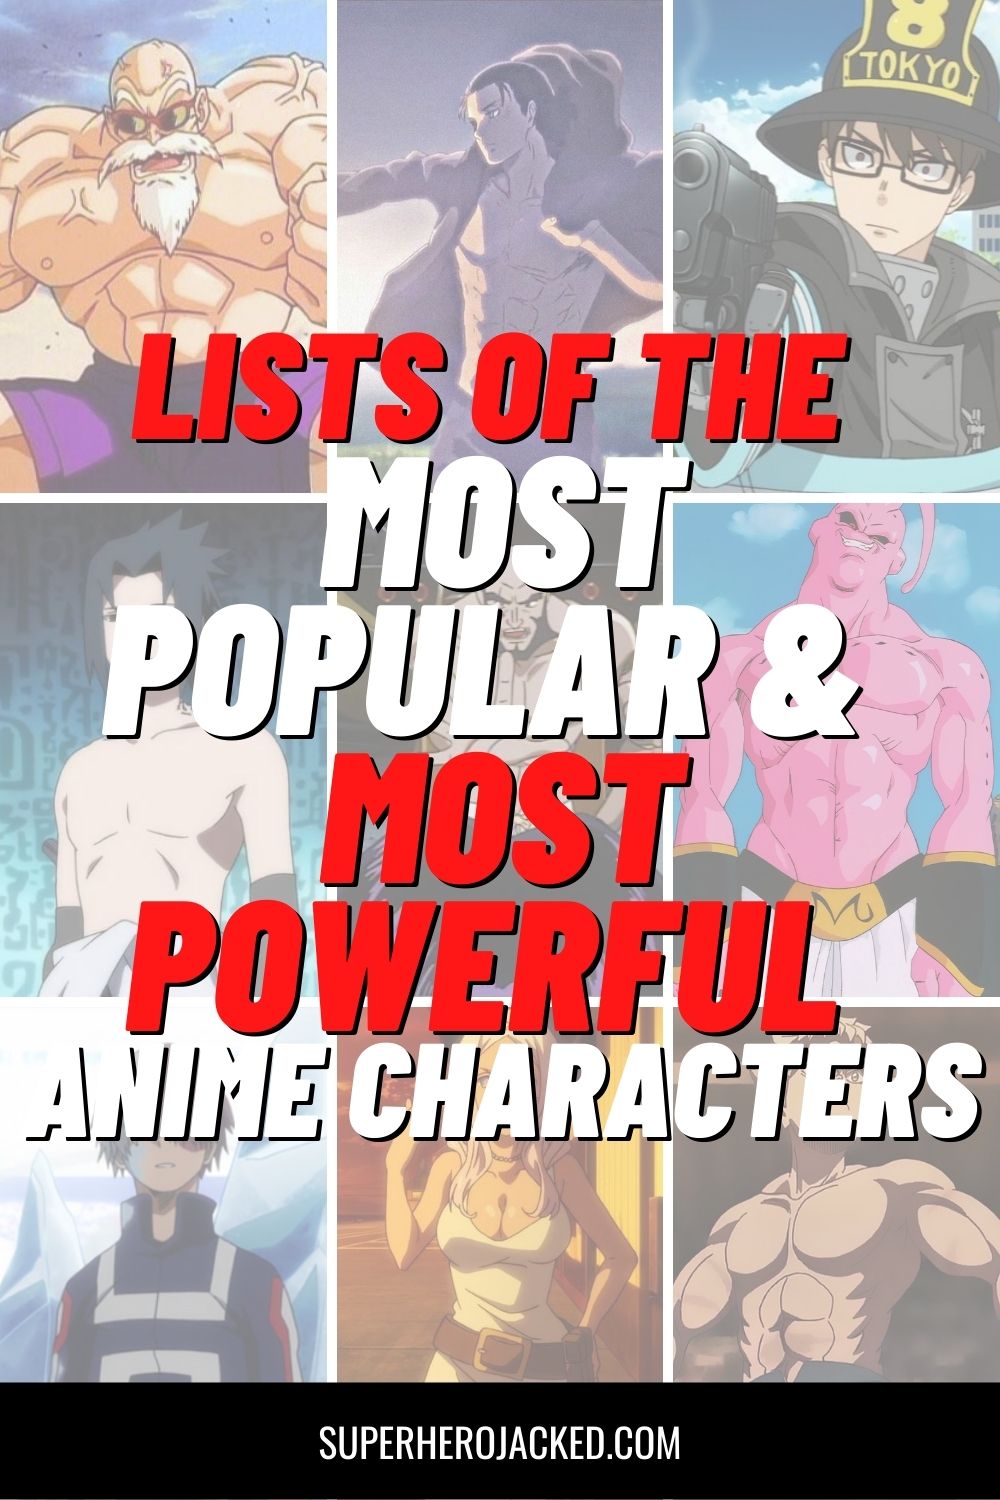 lists of the most popular & most powerful anime characters